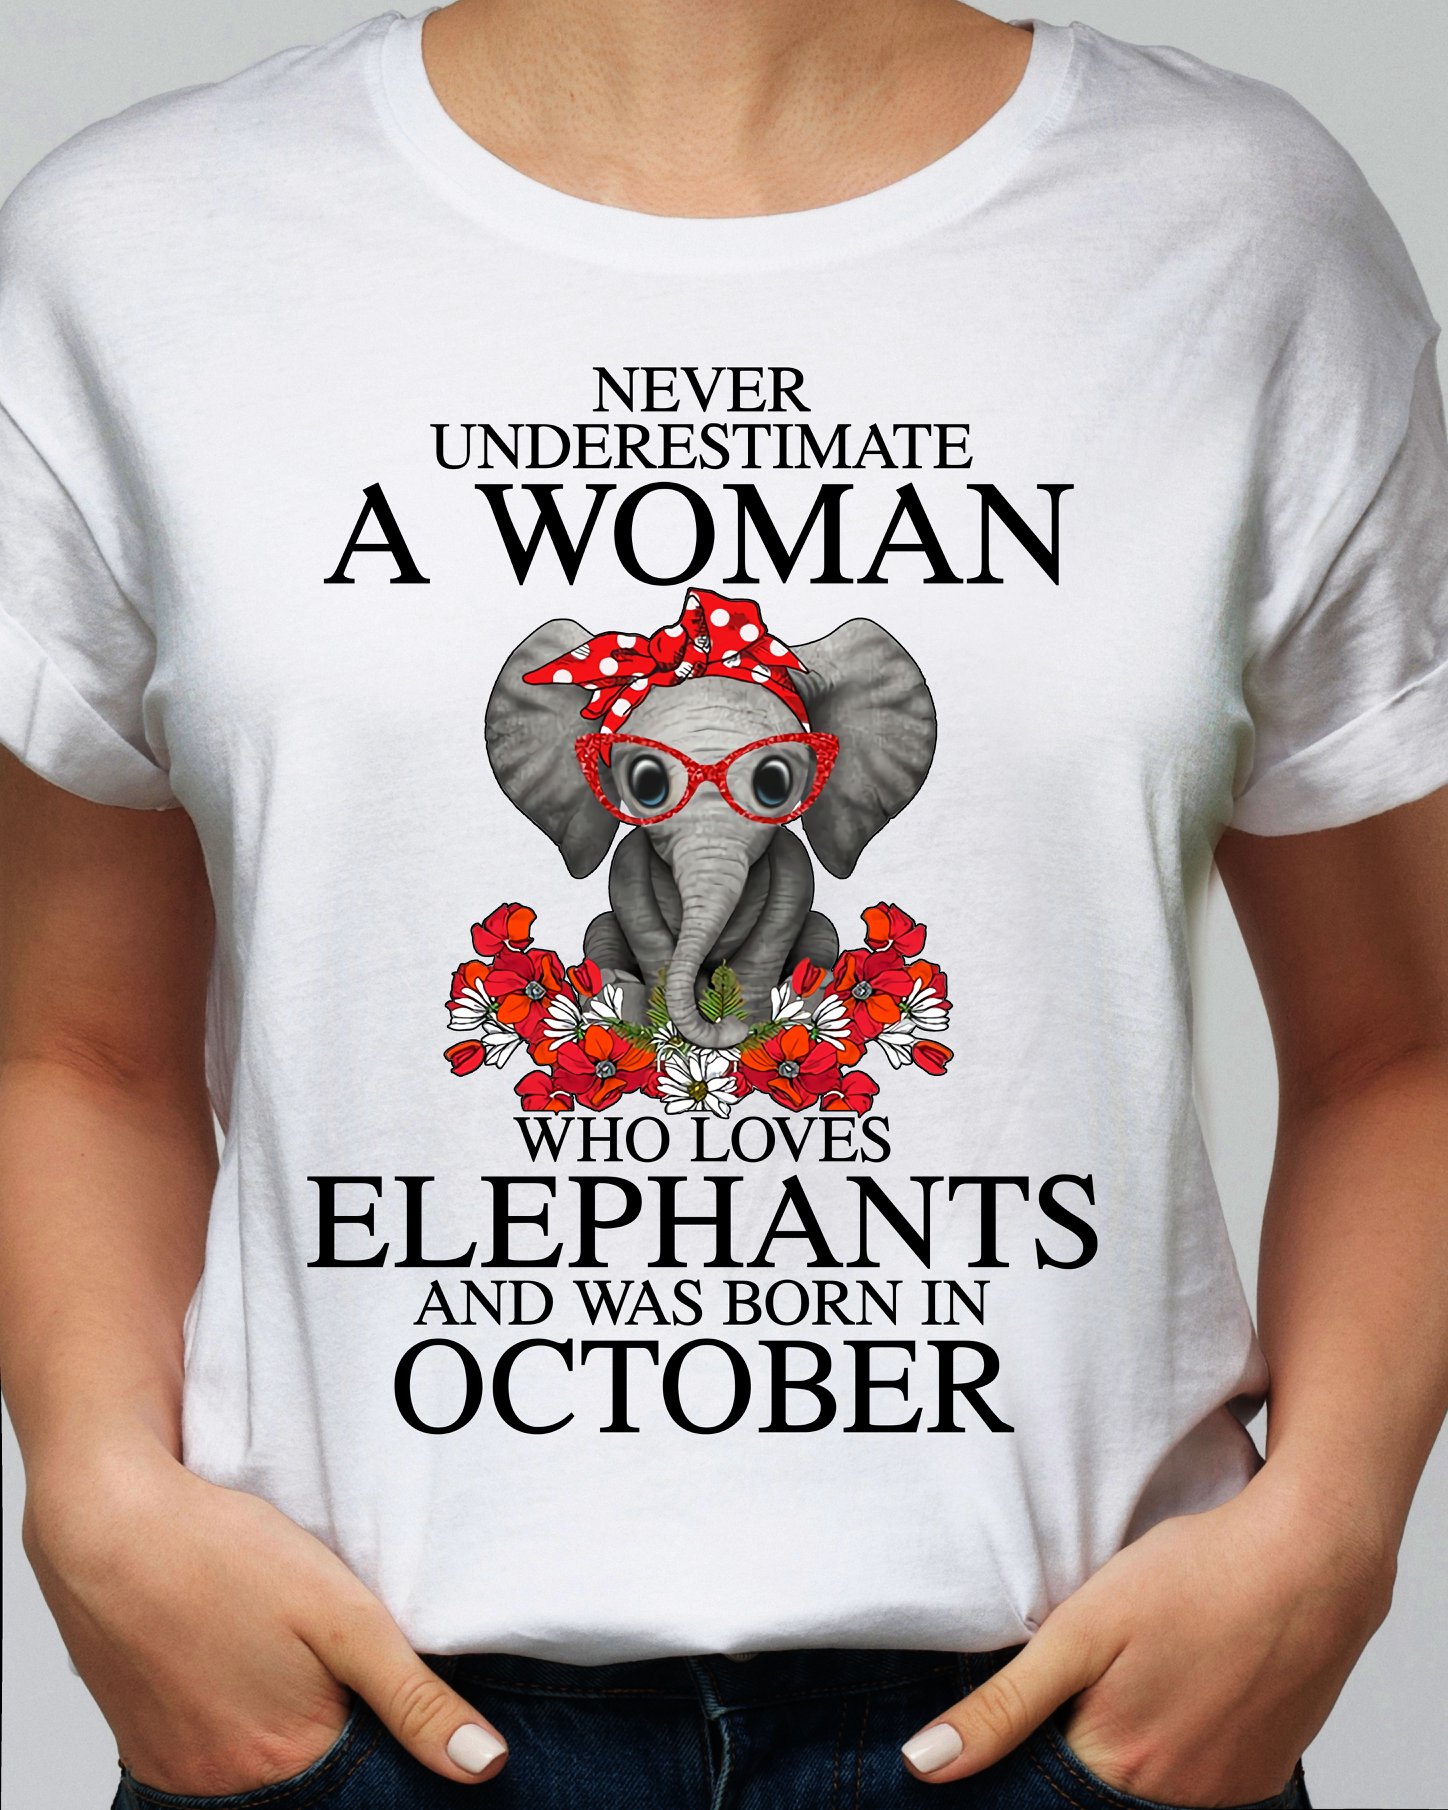 Never underestimate a woman who loves elephants and was born in October